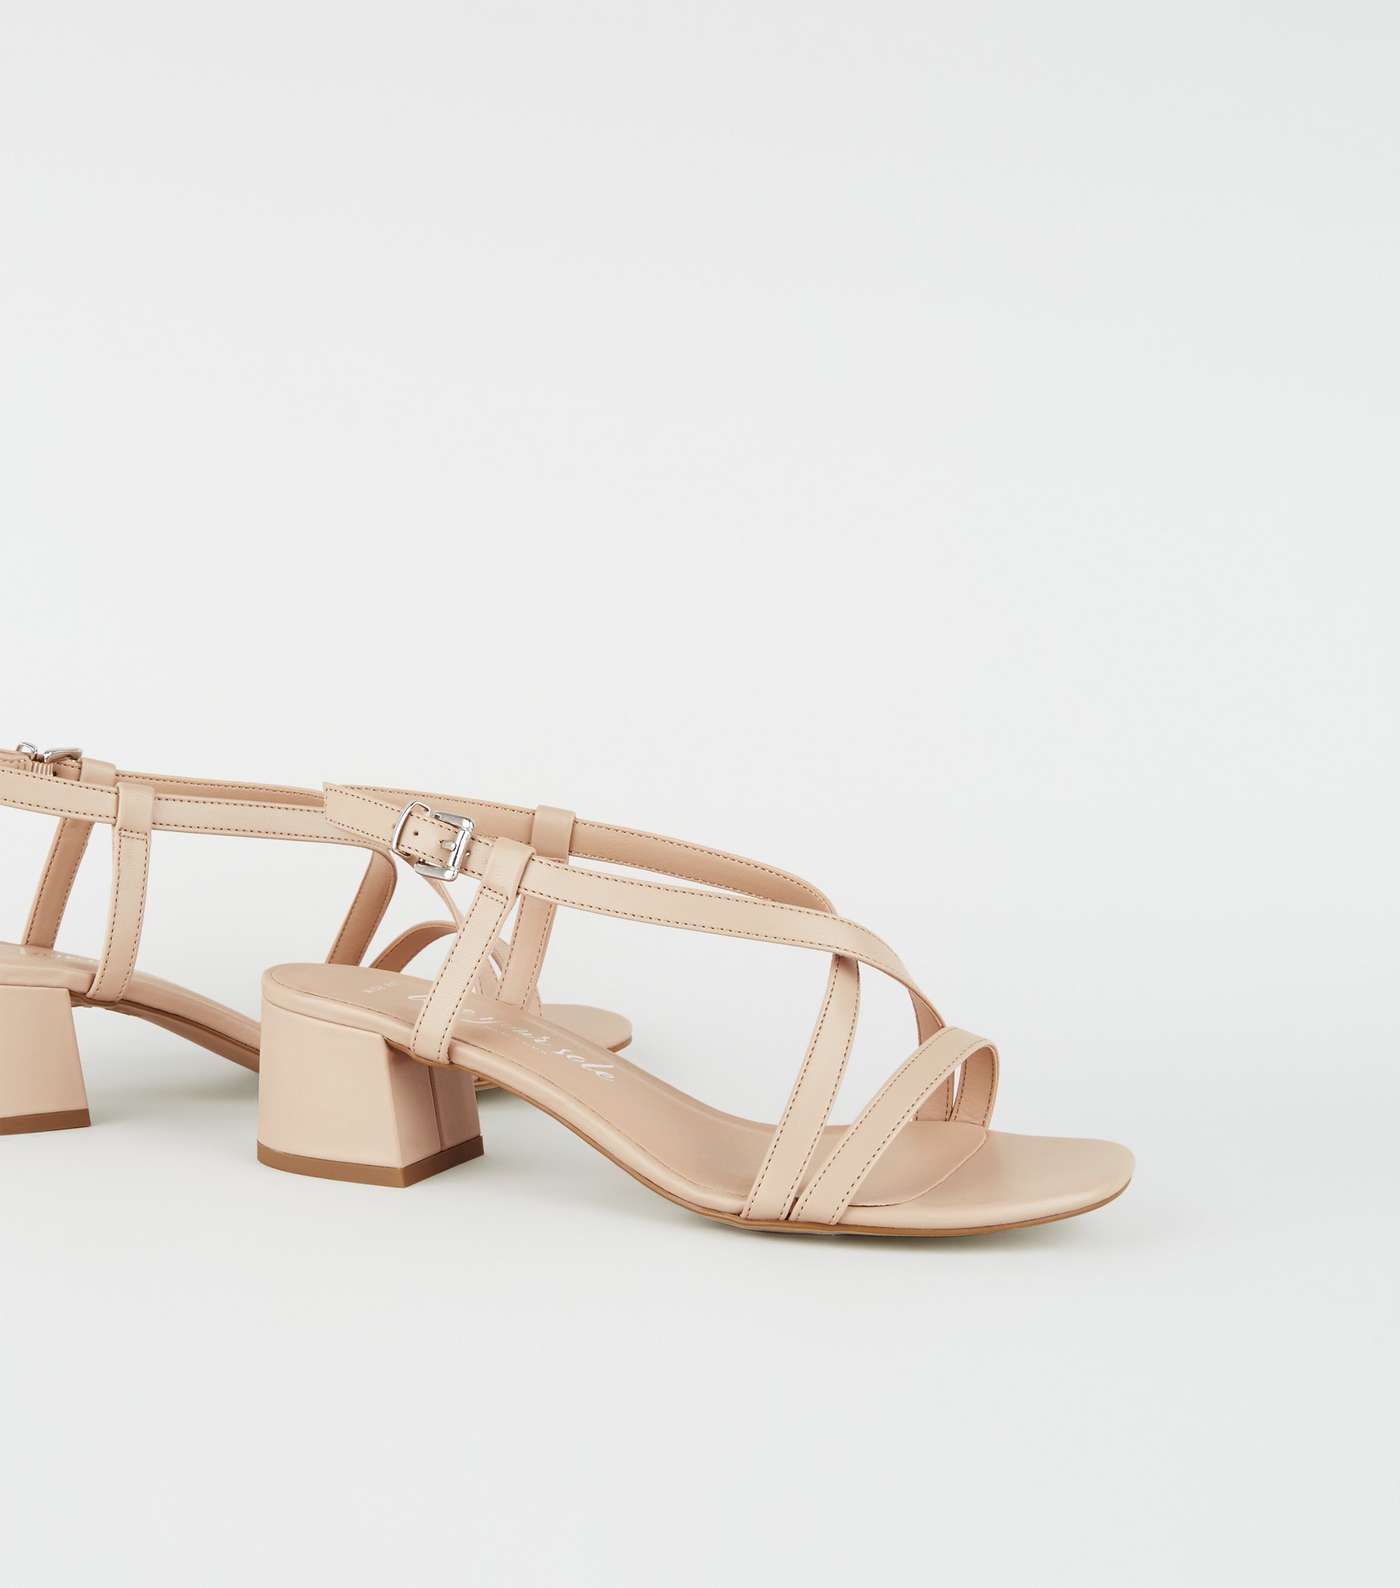 Wide Fit Camel Strappy Low Heel Sandals Image 3